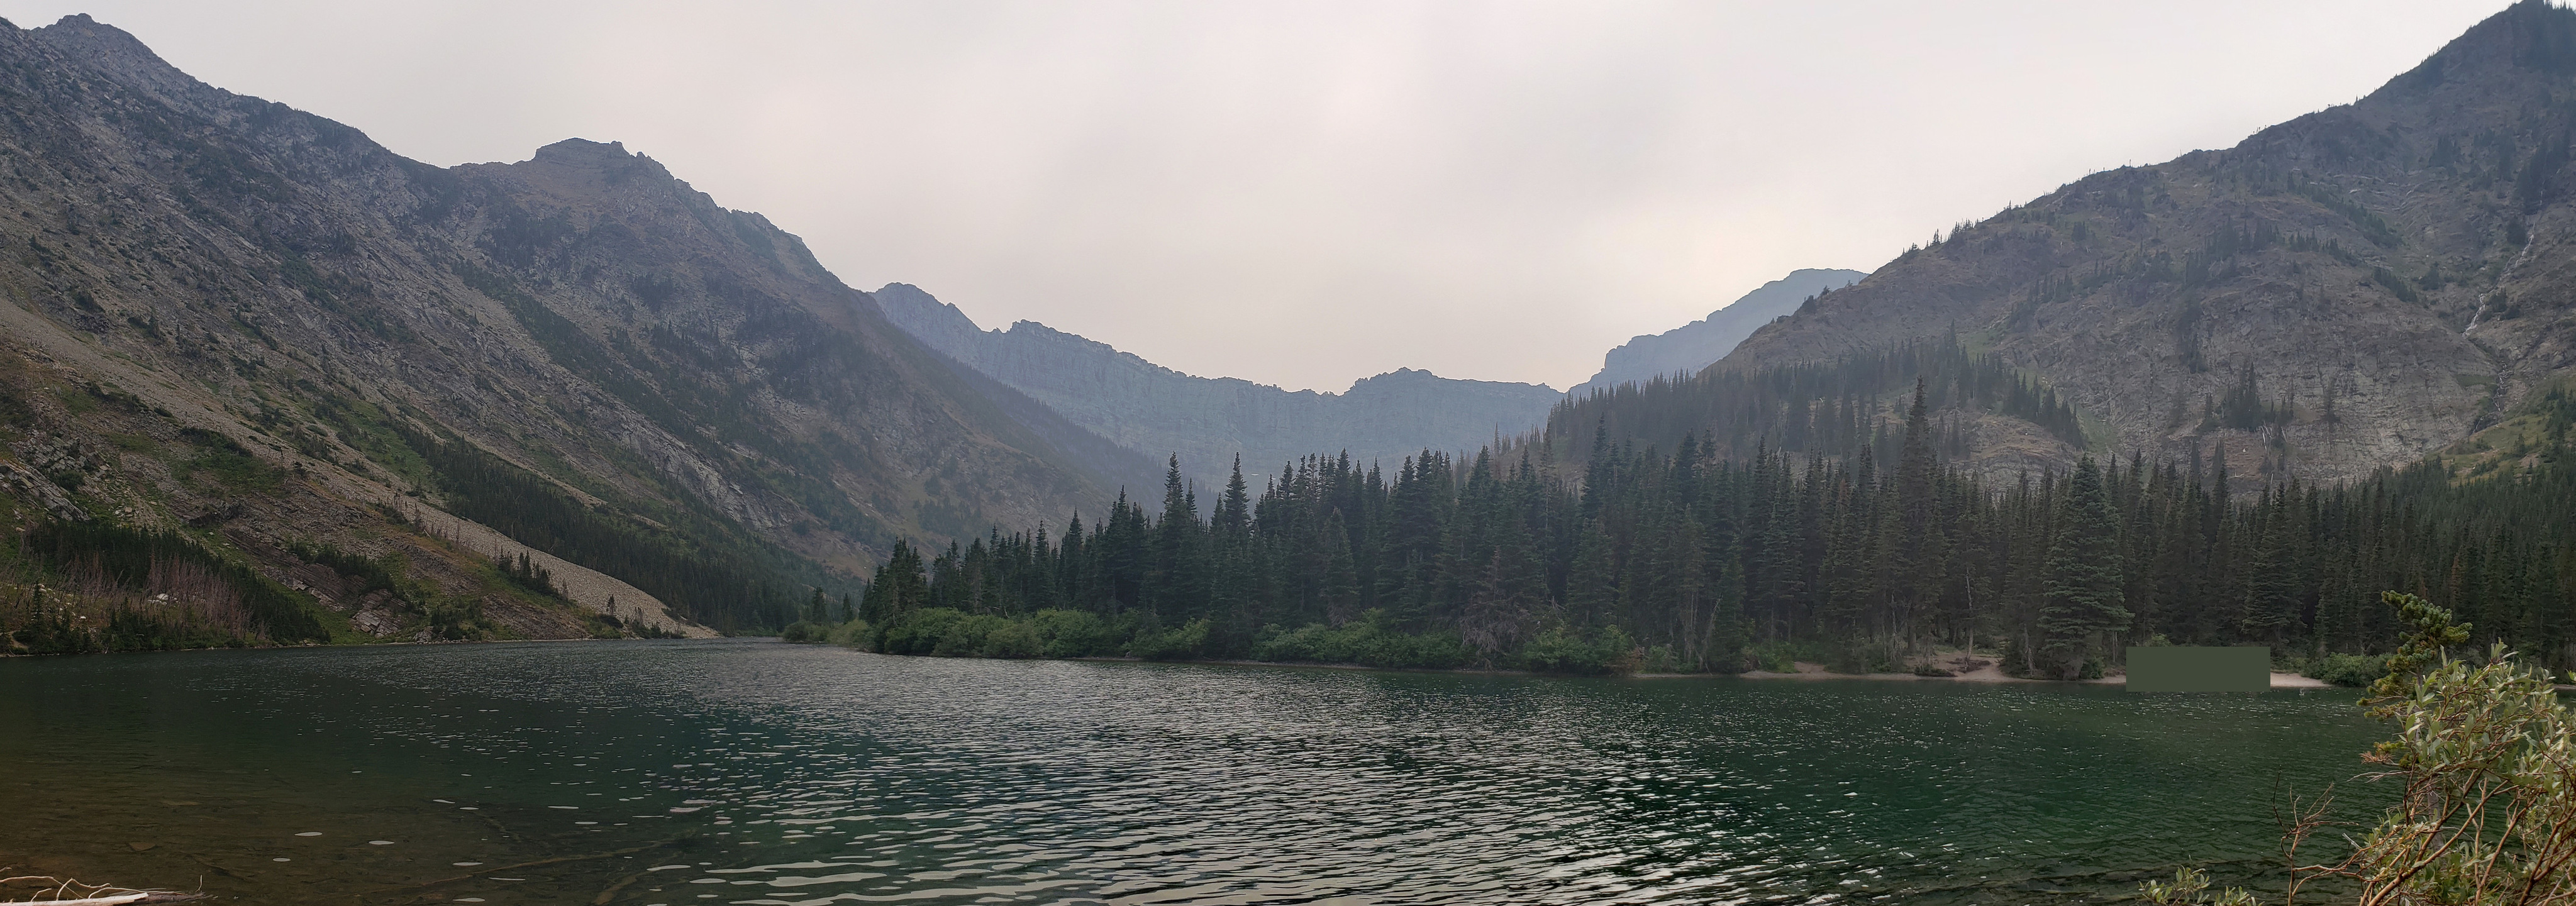 Panoramic view of Bertha Lake from the south shore